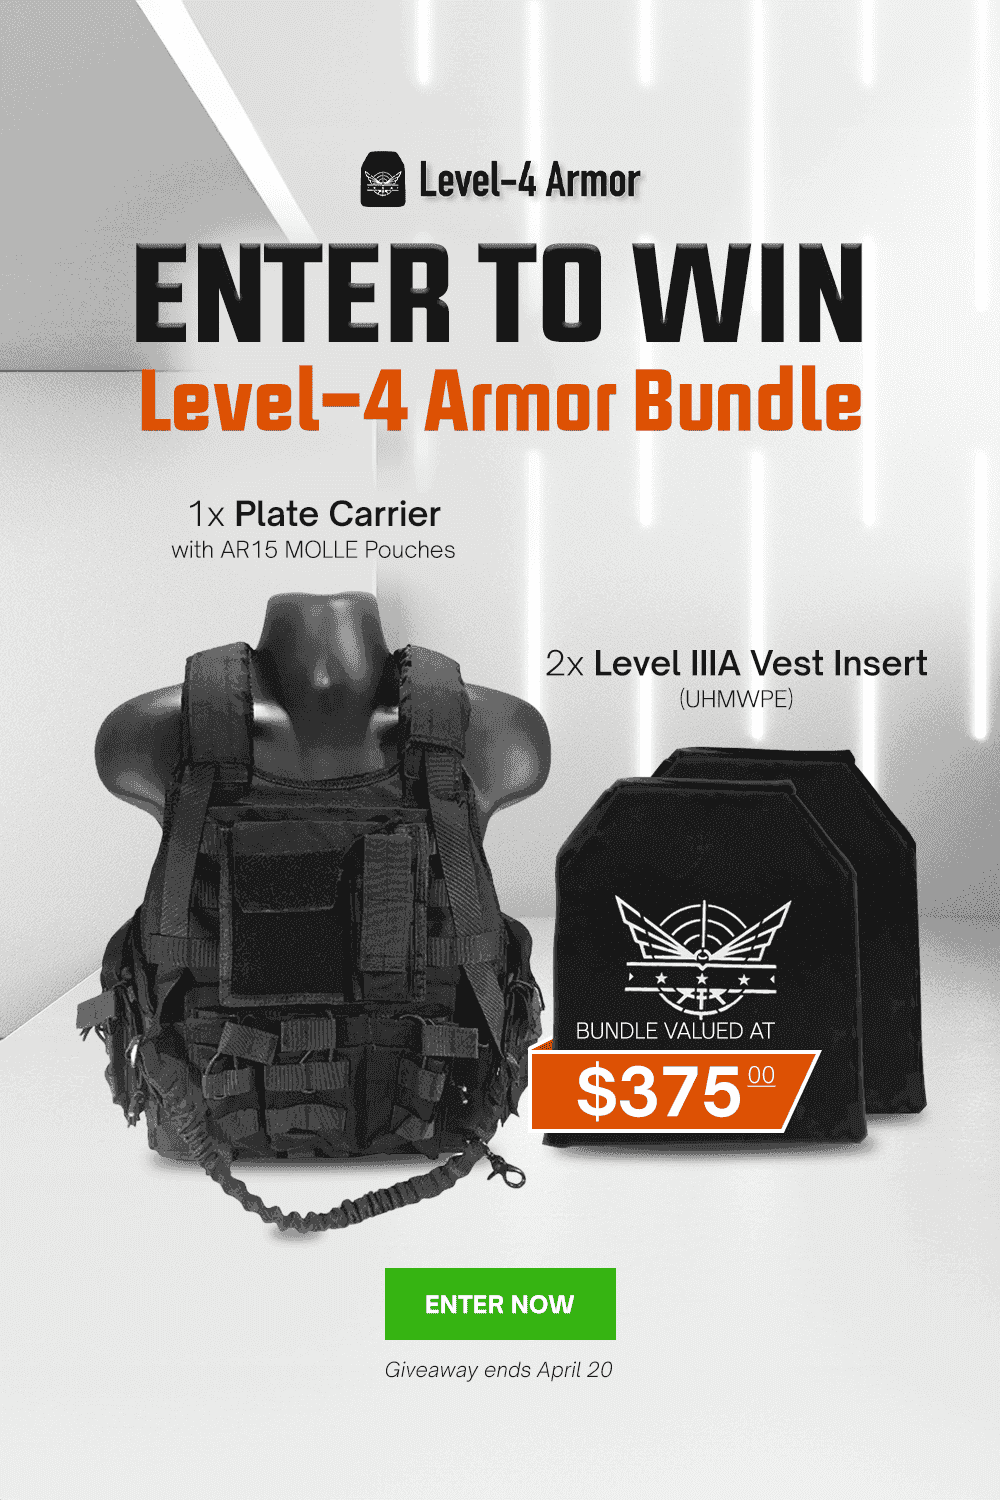 ProtectVest Mini Giveaway